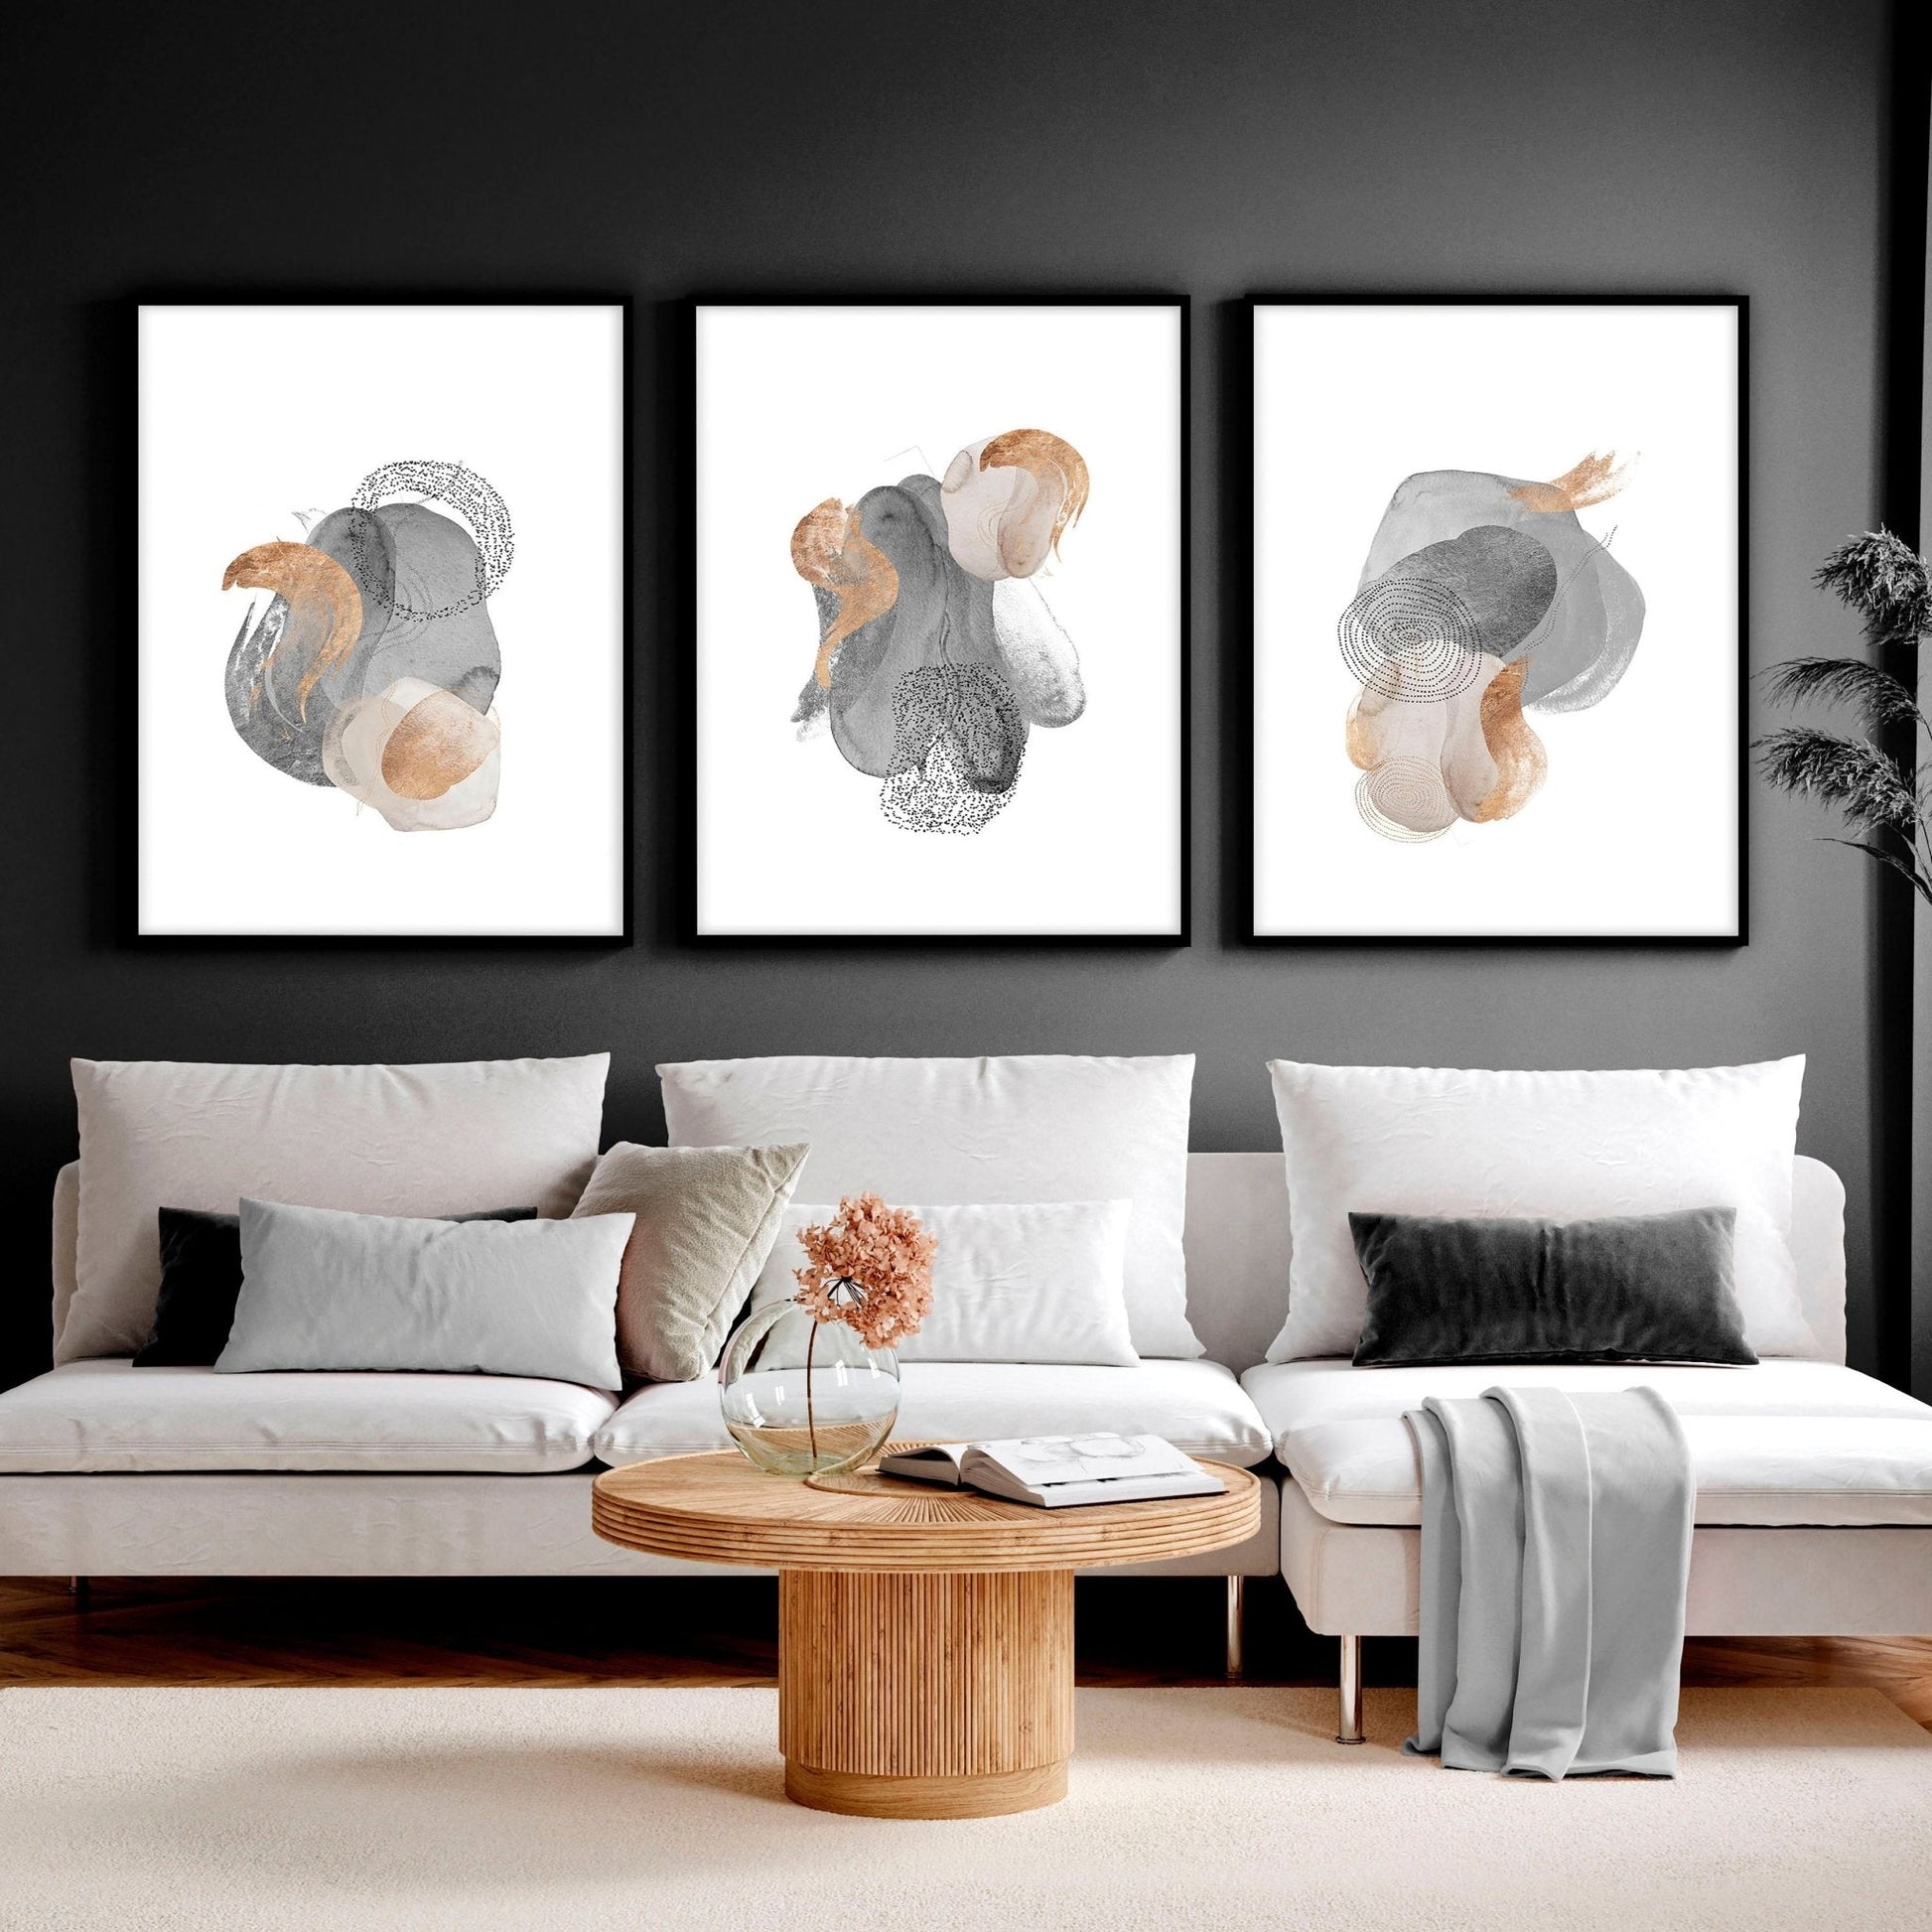 Large abstract - Set of 3 framed wall art prints - About Wall Art